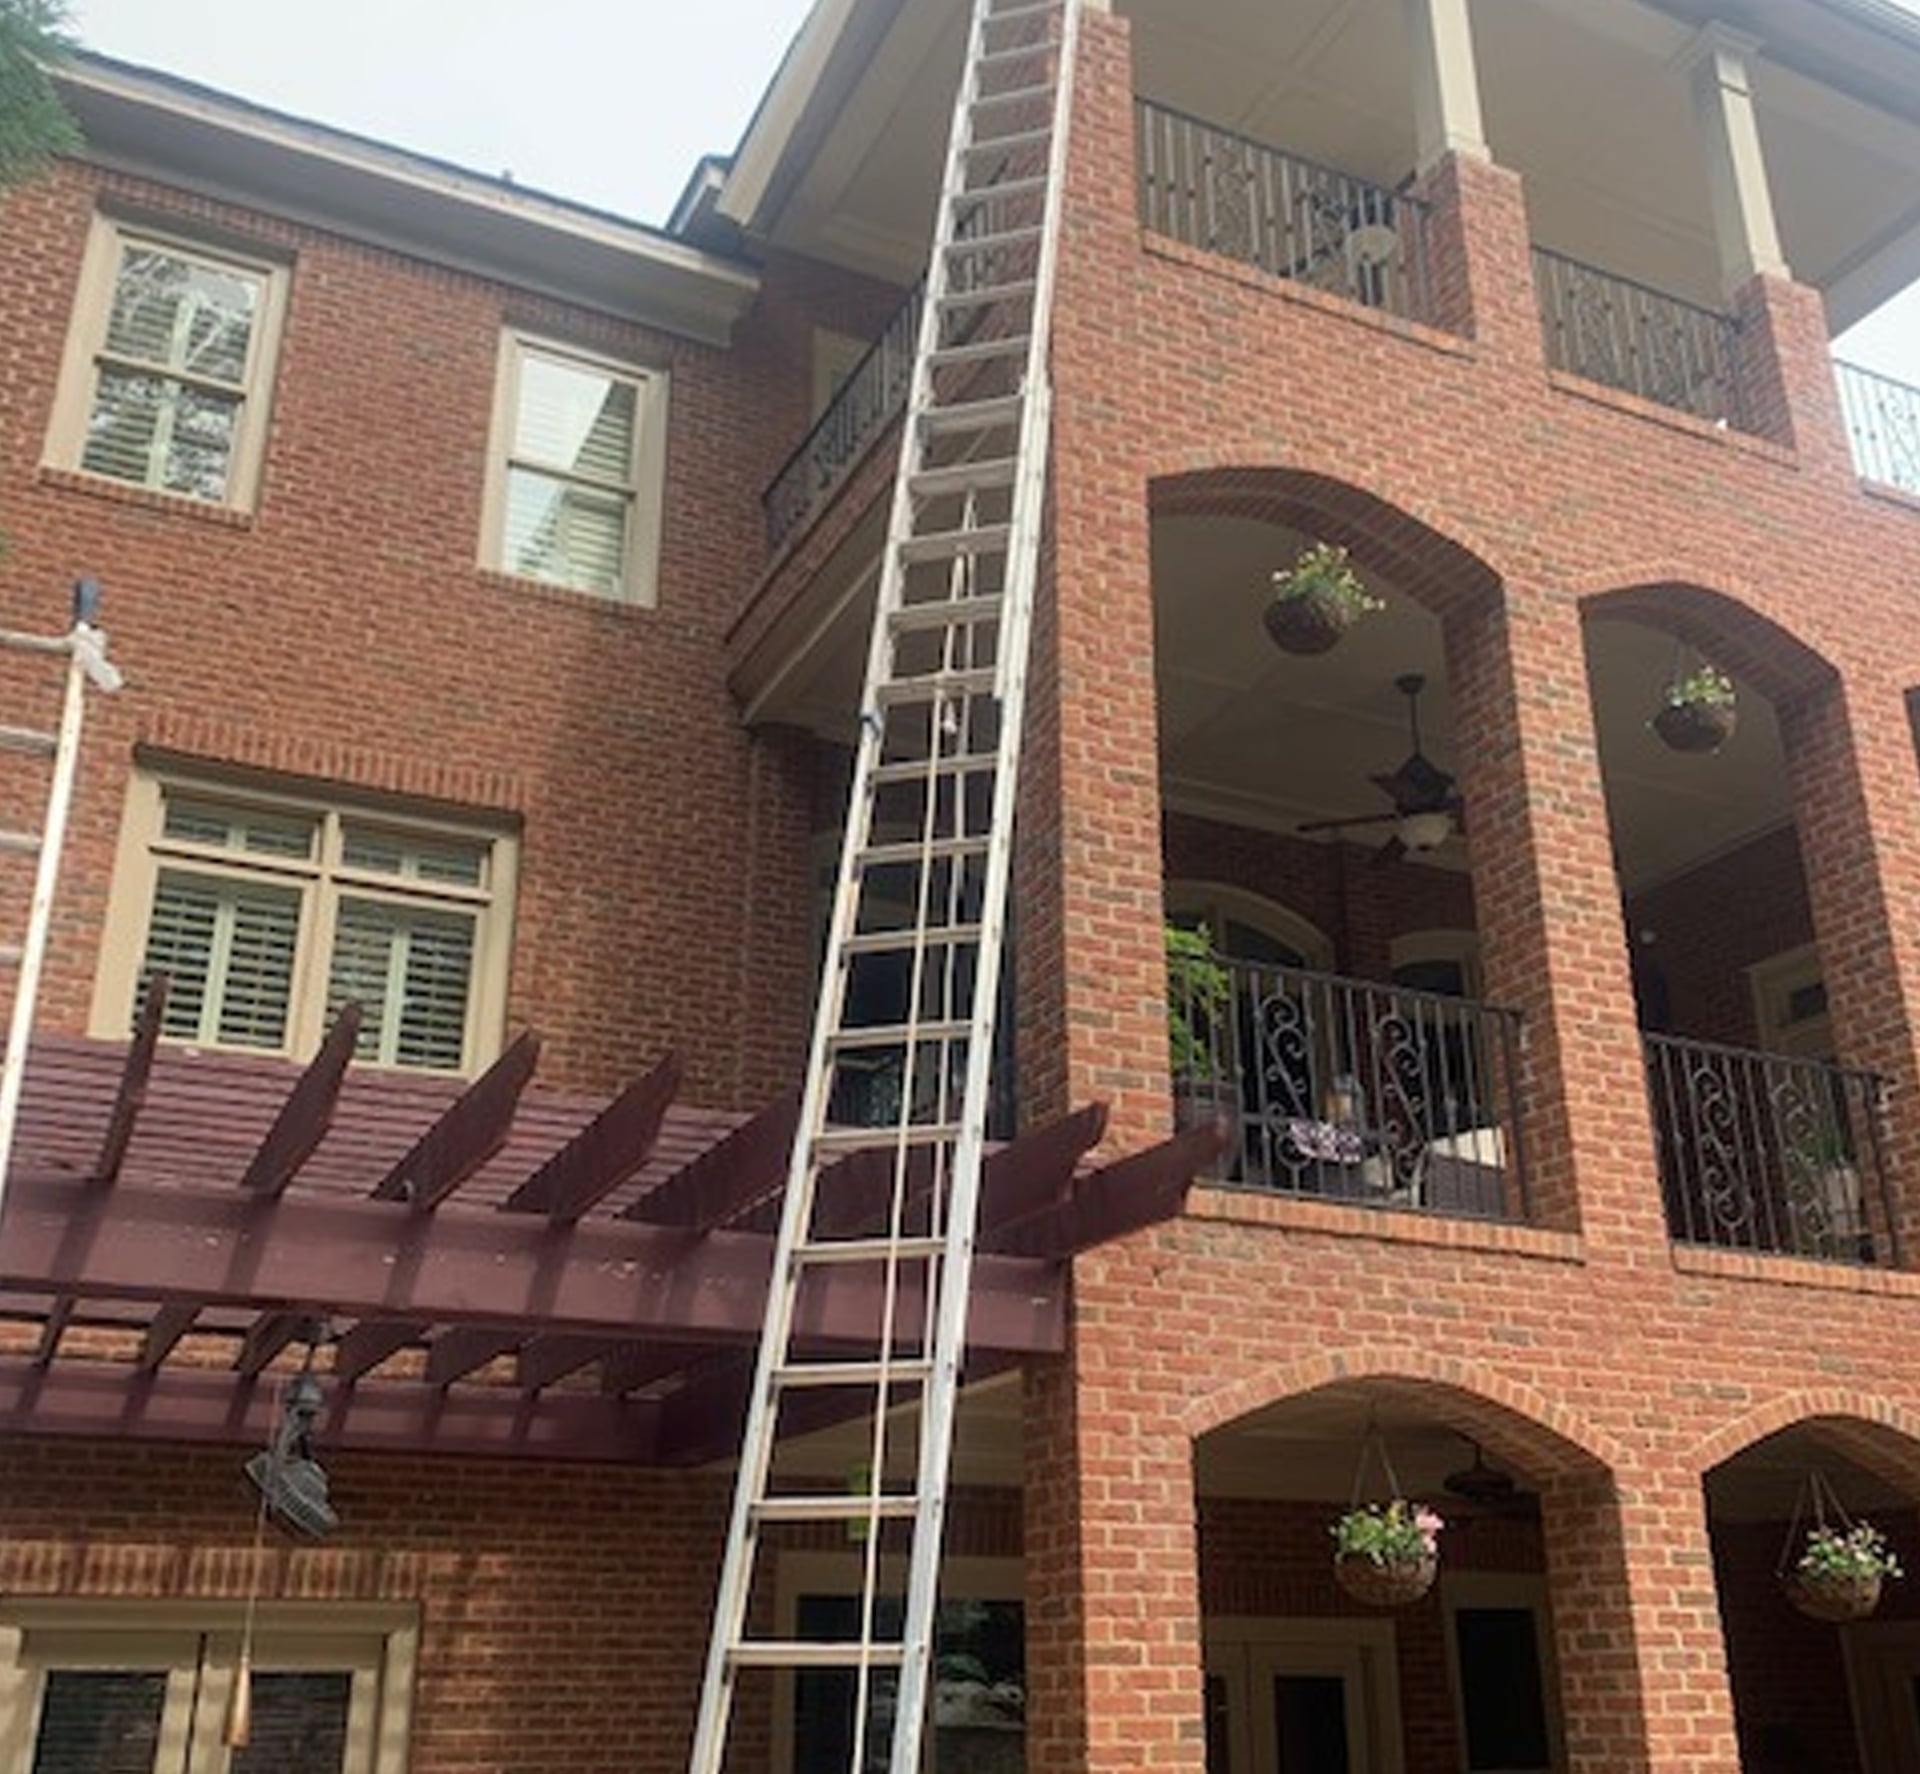 Ladder Infront of house